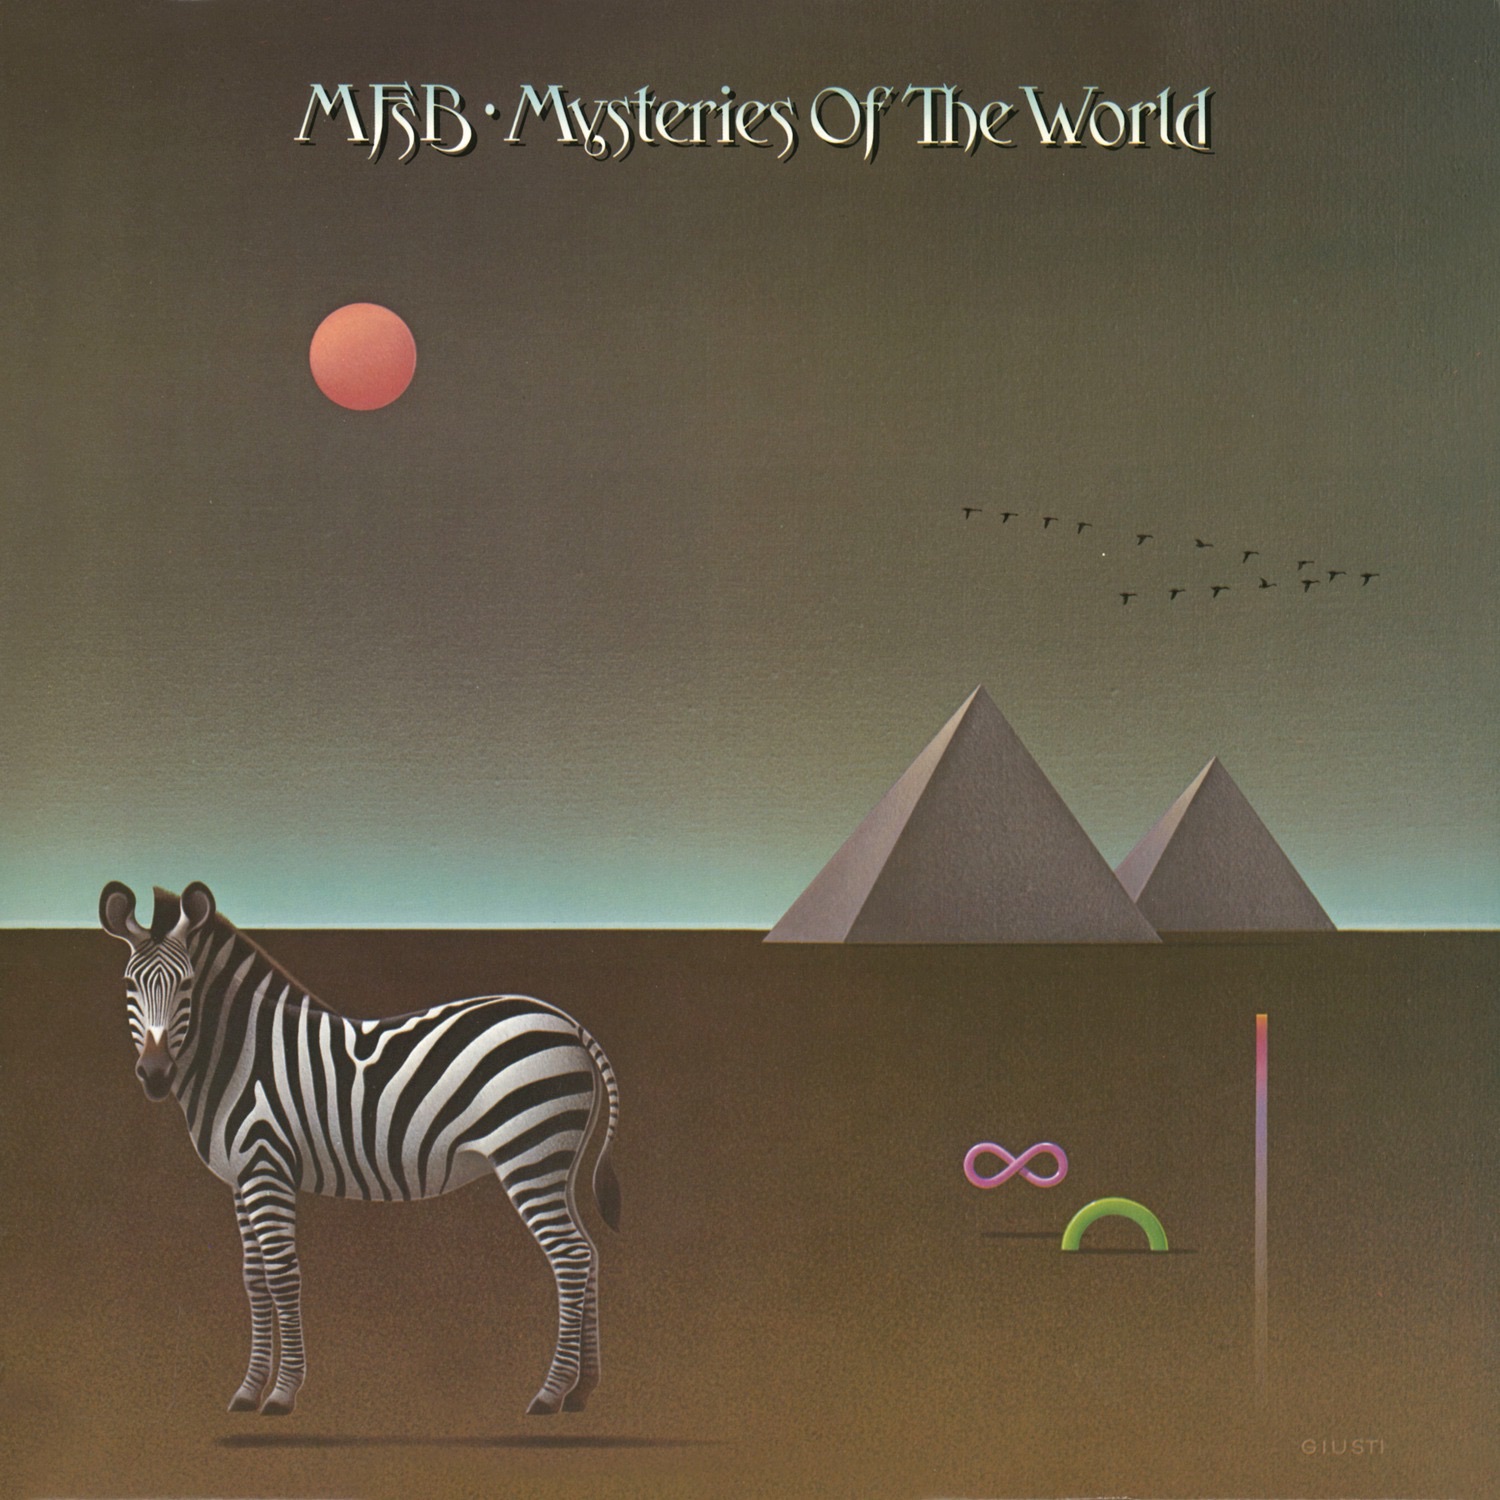 Art for Mysteries of the World by MFSB